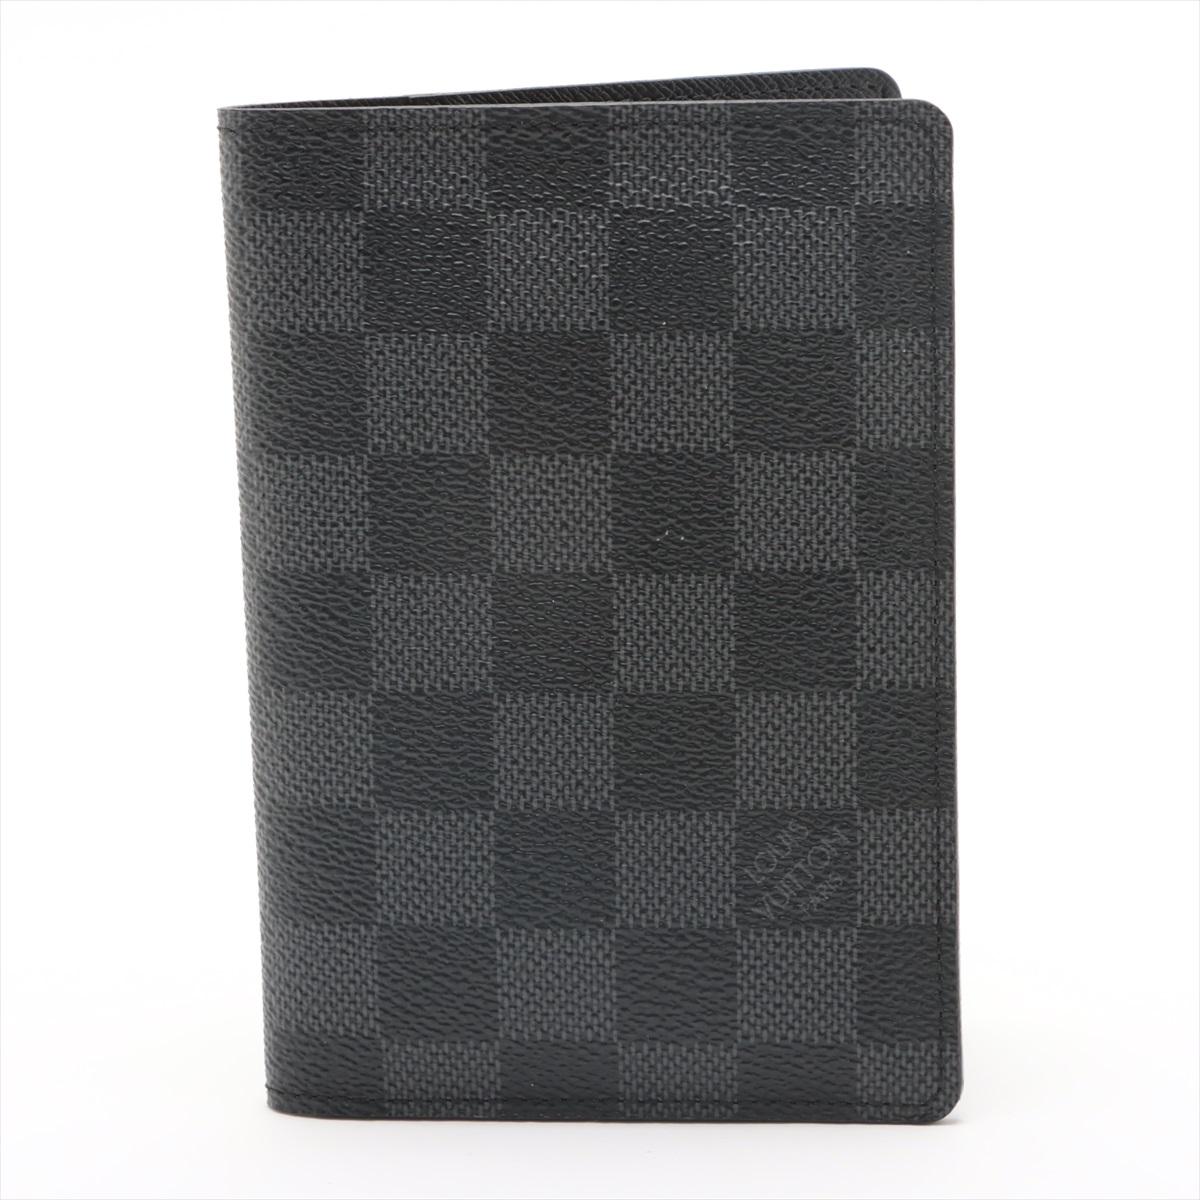 The Louis Vuitton Damier Graphite Passport Cover a sleek and sophisticated accessory designed to accompany the modern traveler in style. The passport cover features the iconic Damier Graphite canvas, showcasing a contemporary and masculine